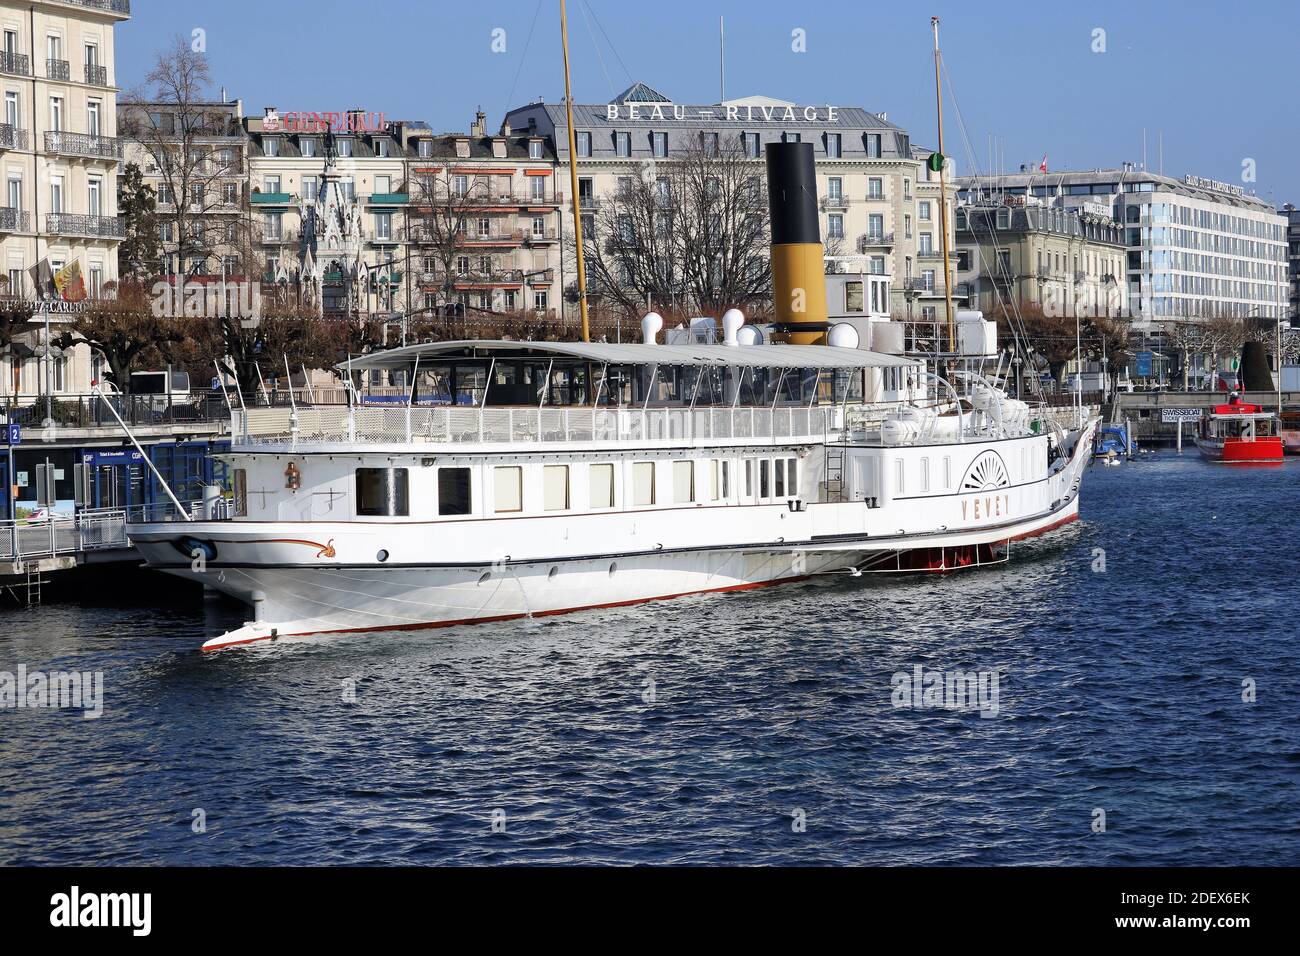 GENEVA, SWITZERLAND - Feb 20, 2018: City trip in Geneva during winter. Picture shows a big boat on the lake and buildings in the background. Stock Photo